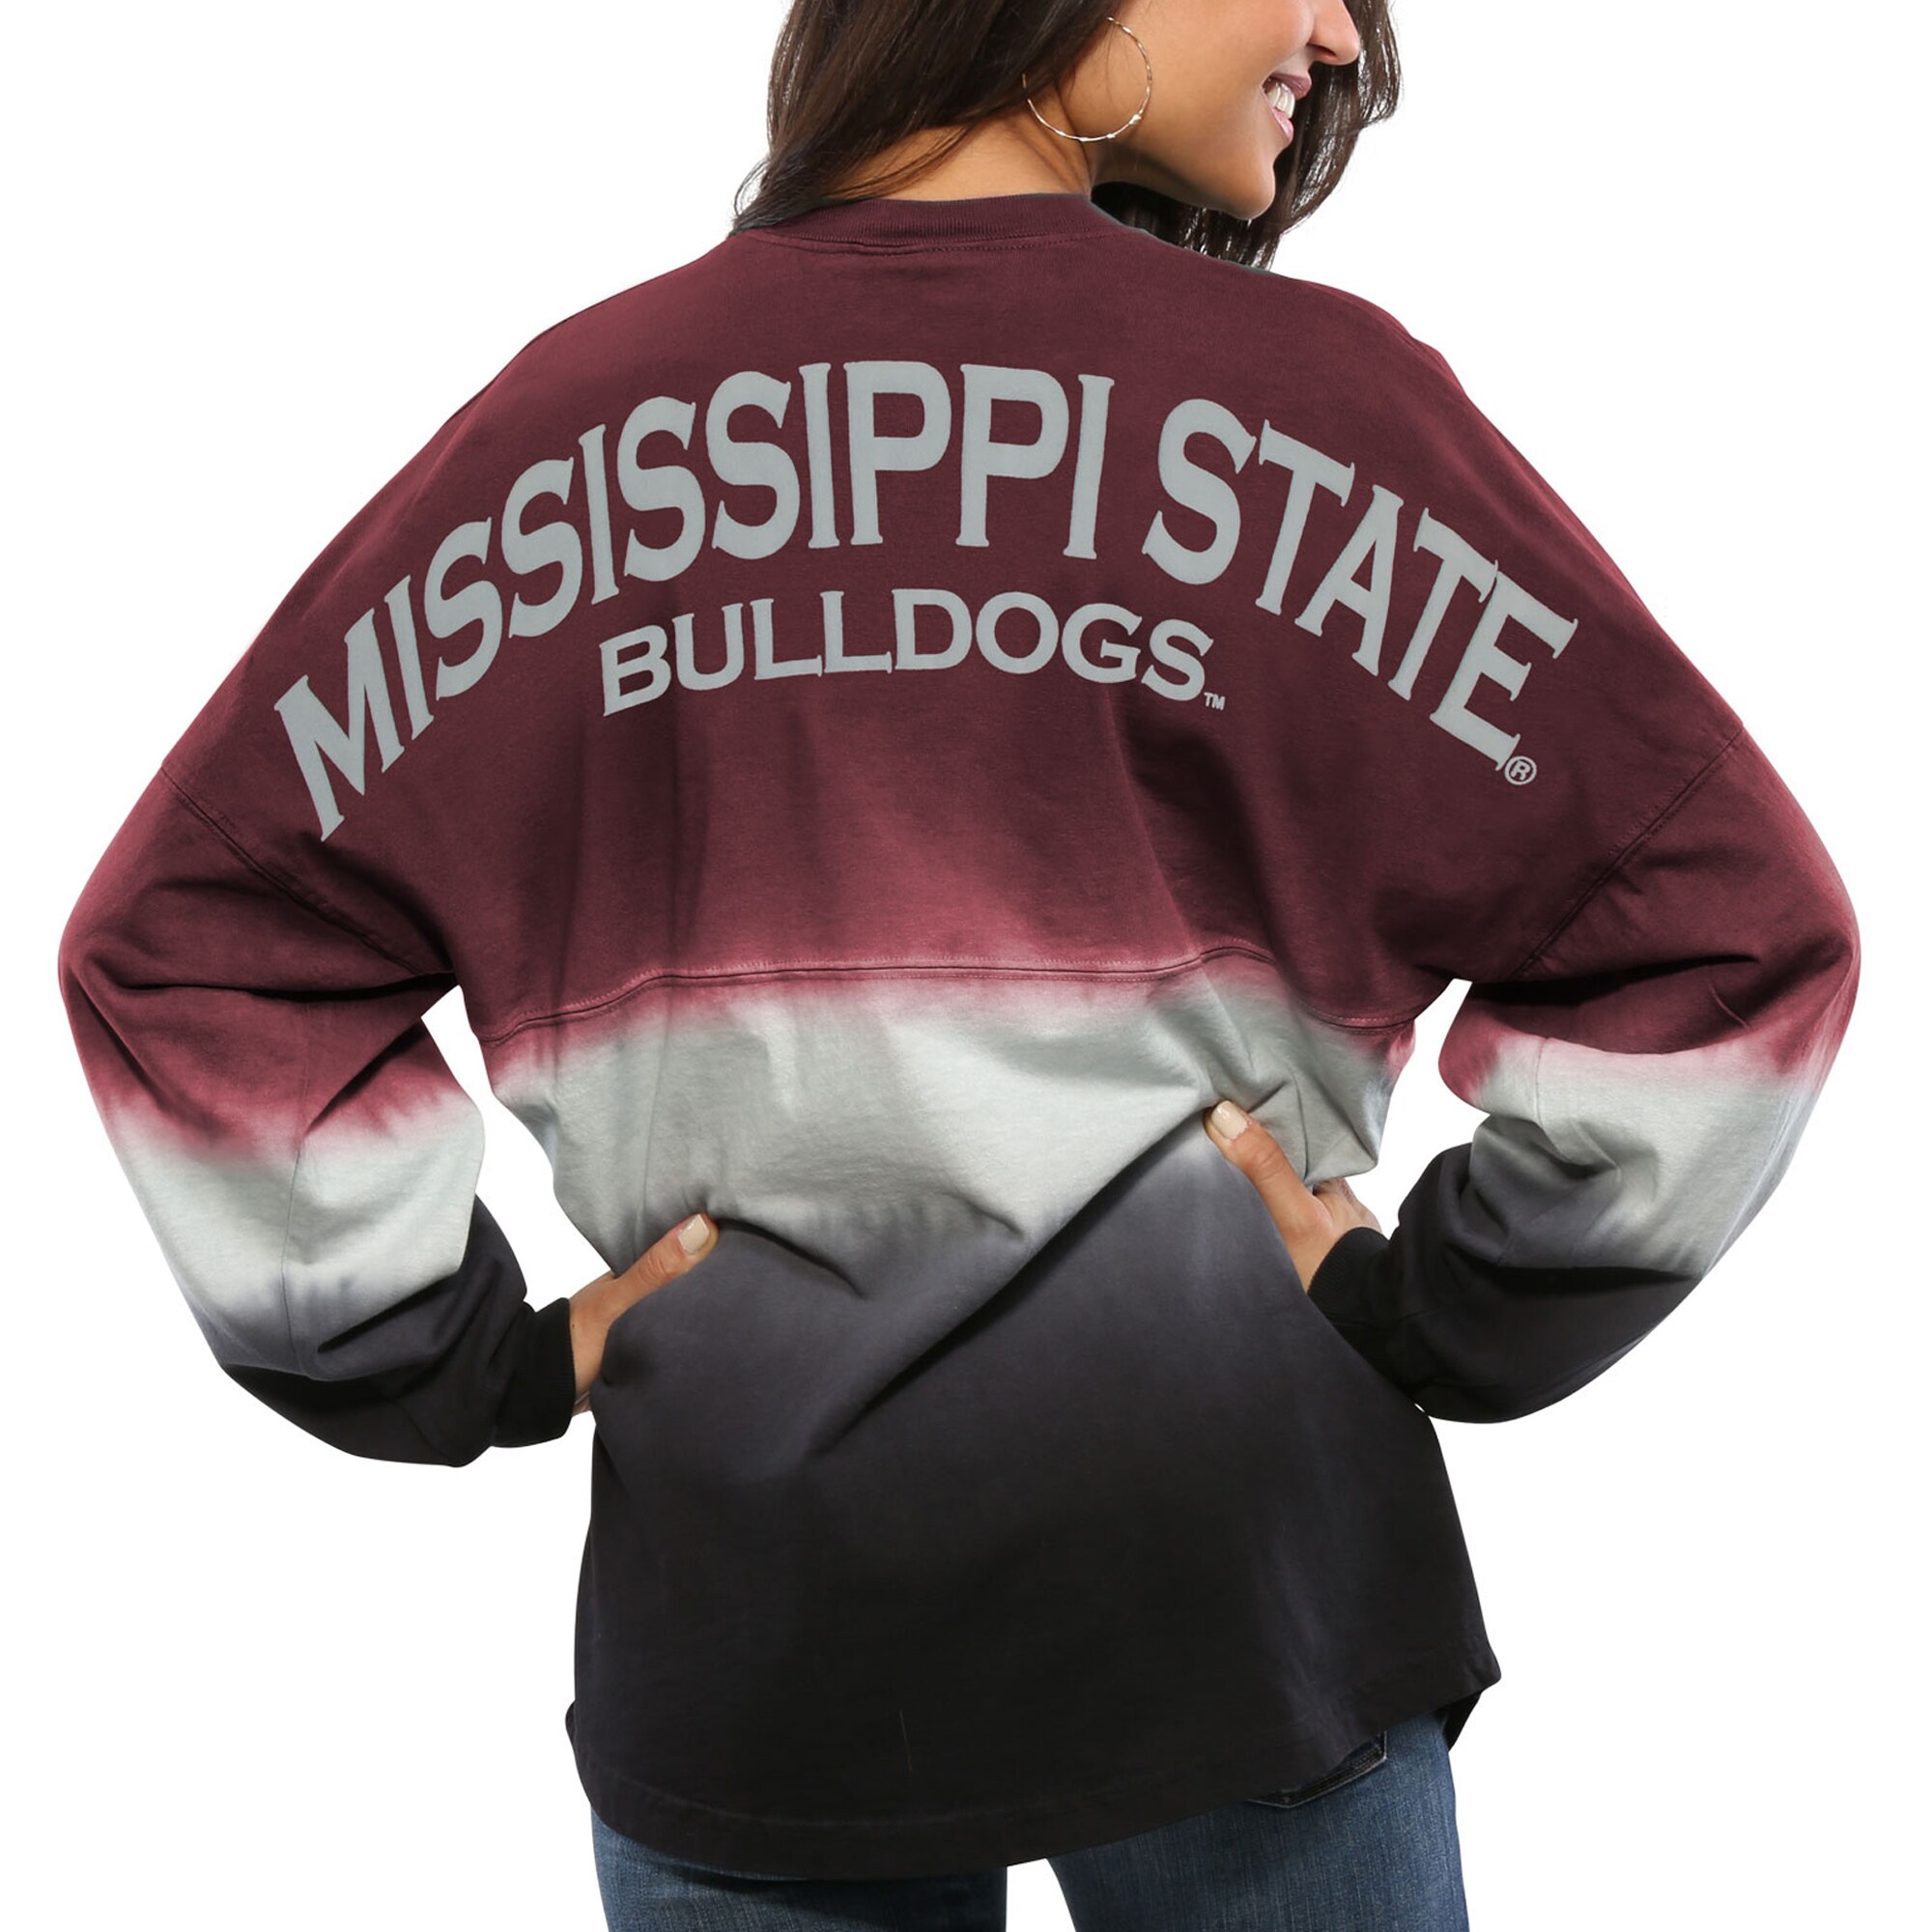 Mississippi State Bulldogs Women'S Ombre Long Sleeve Dip-Dyed Spirit Jersey - Maroon For Youth Women Men